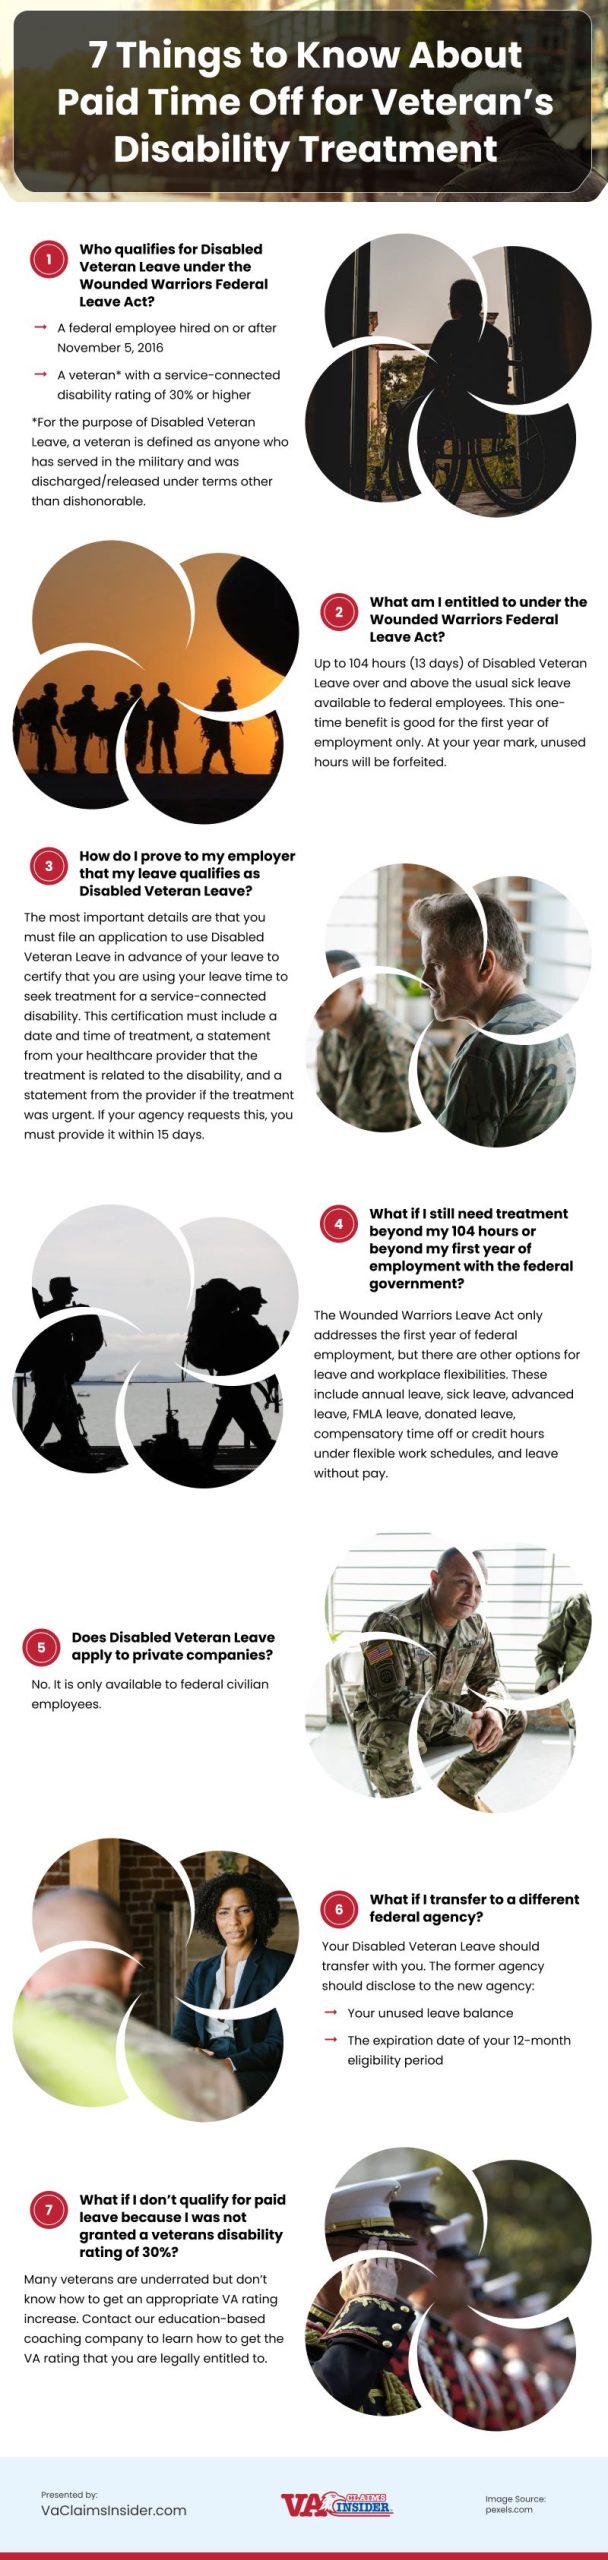 7 Things to Know About Paid Time Off for Veteran's Disability Treatment Infographic